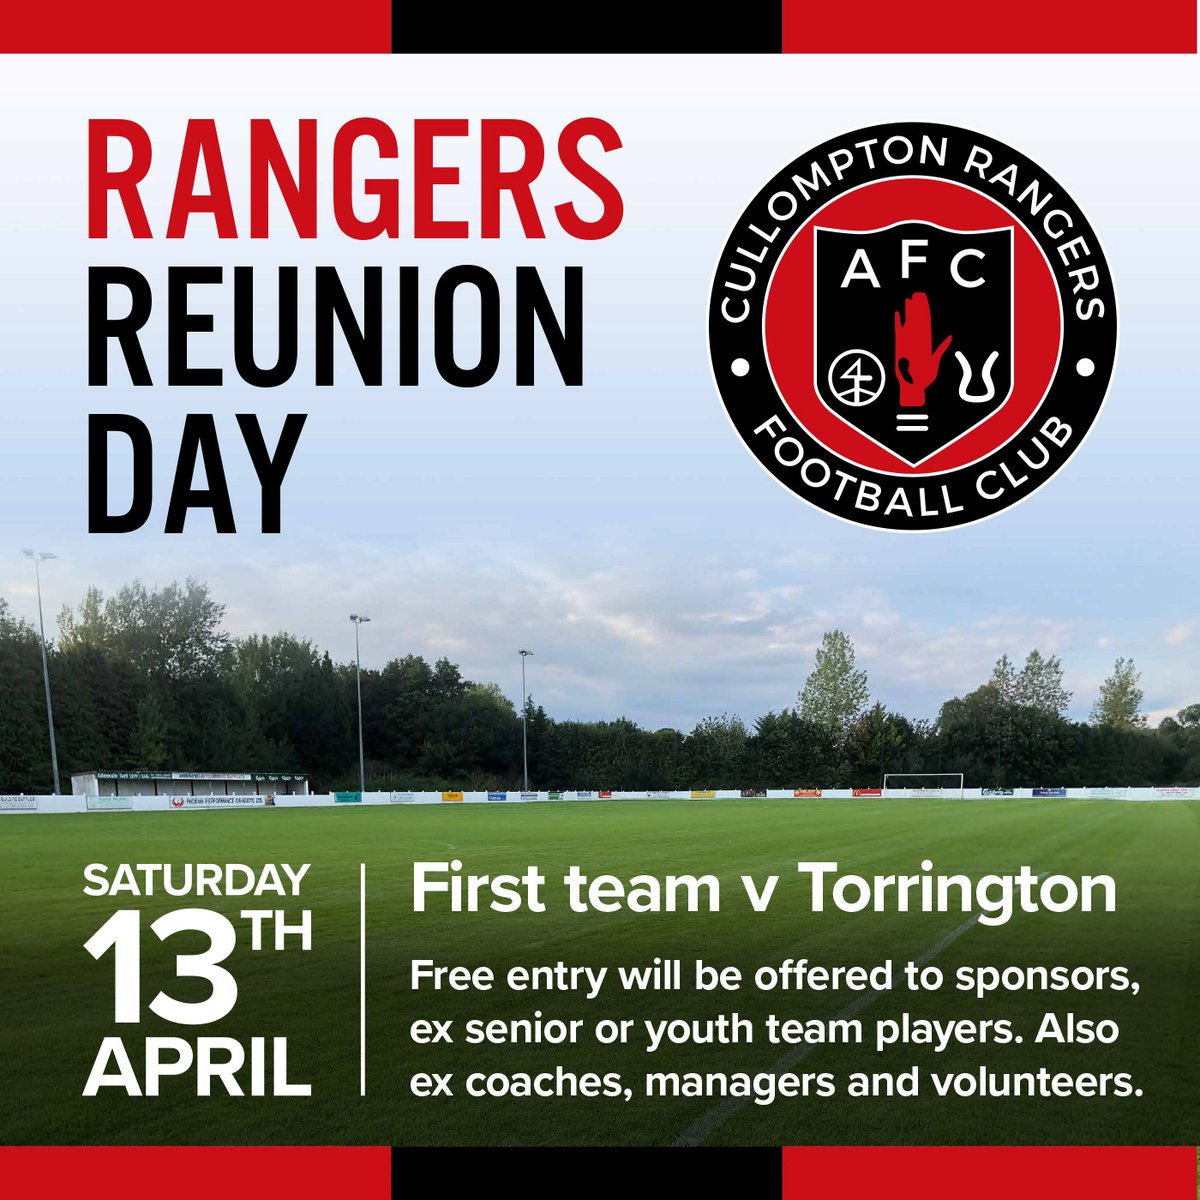 A reminder of the Rangers Reunion Day tomorrow. We would love to see as many ex-Rangers as possible. Free entry for sponsors, ex senior or youth team players, coaches or volunteers. Just let us know on the gate and you'll be shown in for free.